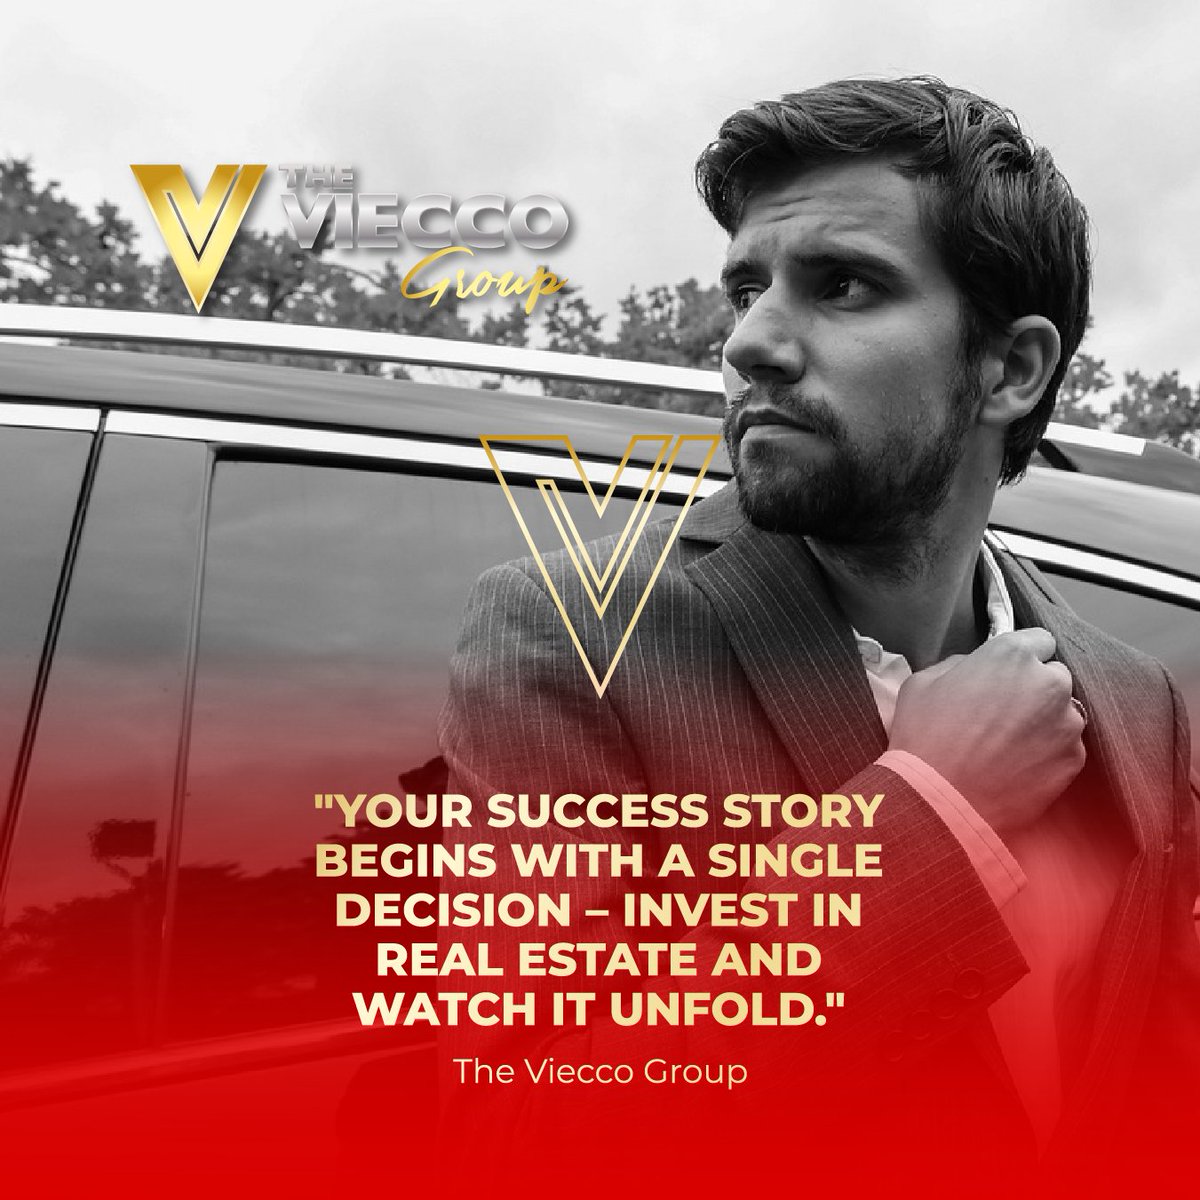 Let’s connect and take our Business to a New Level together!!!!!

#thevieccogroup #makingthingshappen #successstory #thenewbanking #construyendoriqueza #buildingwealth #entrepreneur #entrepreneurship #luxury #topproducer #mortgages #sales #business #investment #opportunities…